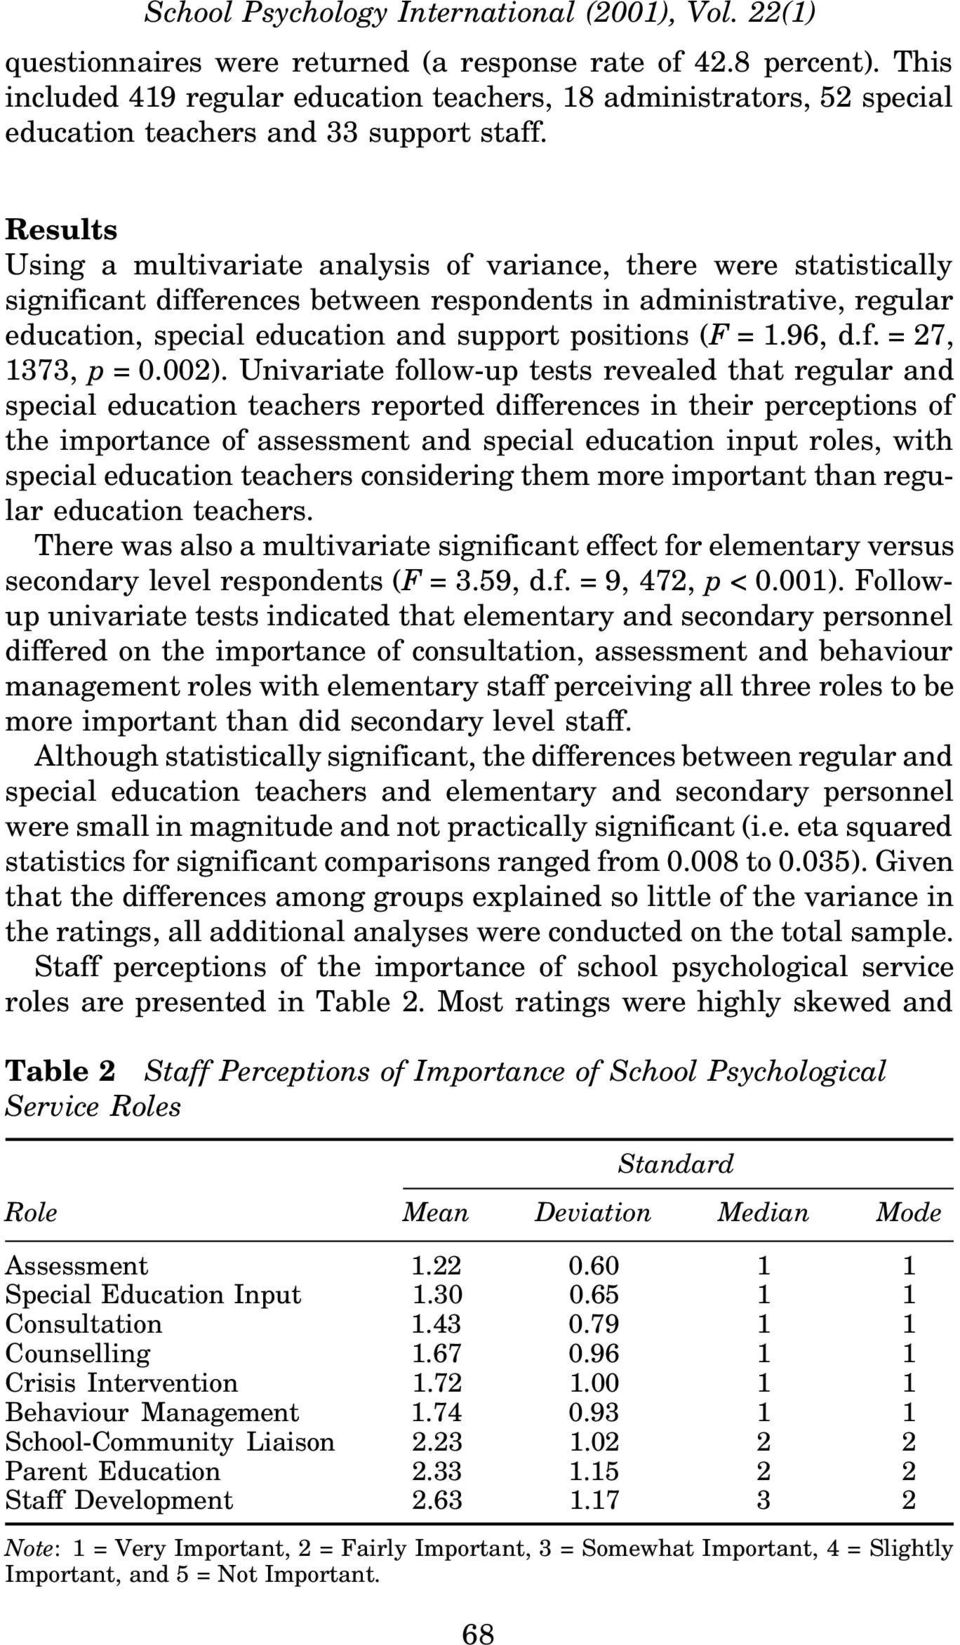 Results Using a multivariate analysis of variance, there were statistically significant differences between respondents in administrative, regular education, special education and support positions